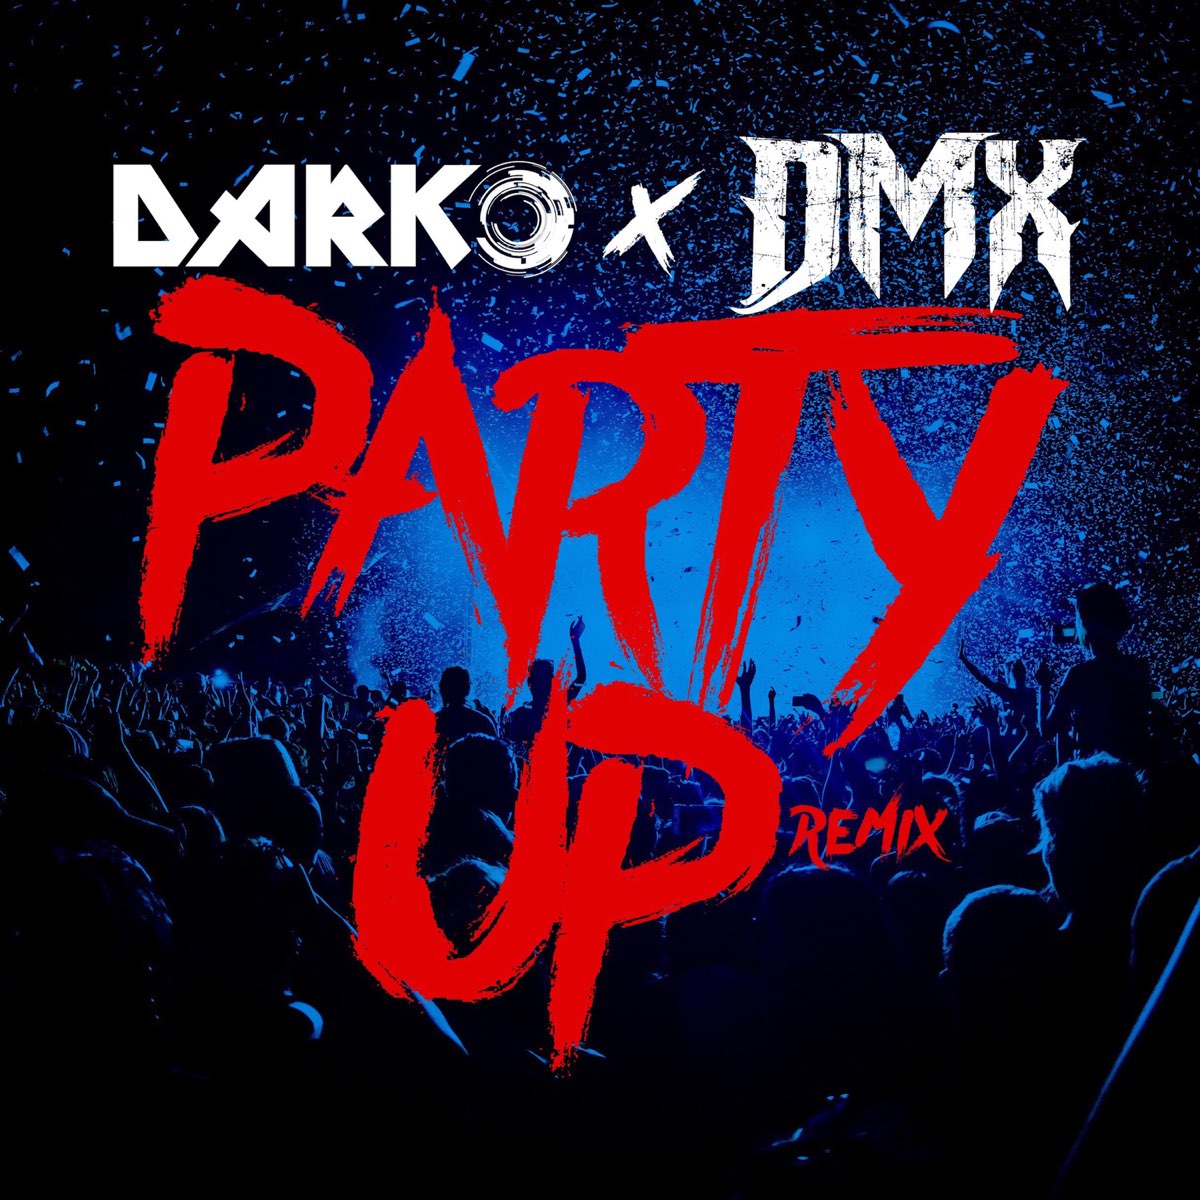 DMX - Party up (up in here). Party up. ДМХ парти ап. Party up (up in here) (Darko Remix).